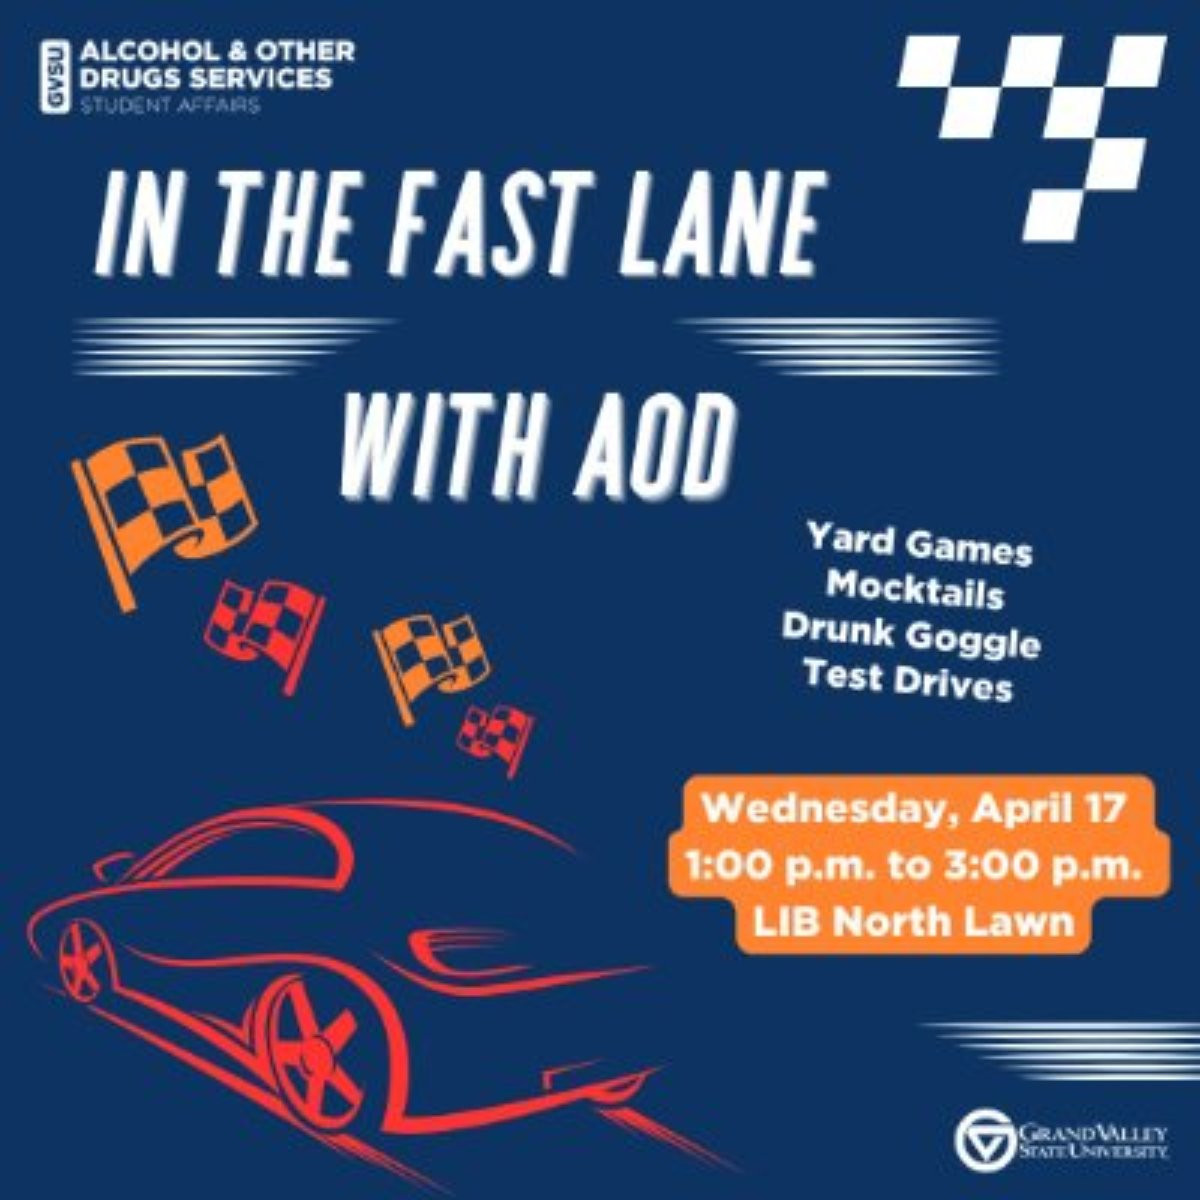 A red race car with red and orange flags with text that reads In the Fast Lane with AOD. Yard Games, Mocktails, Drunk Goggle, Test Drives. Wednesday April 17 1pm-3pm LIB North Lawn with the GVSU AOD logo.